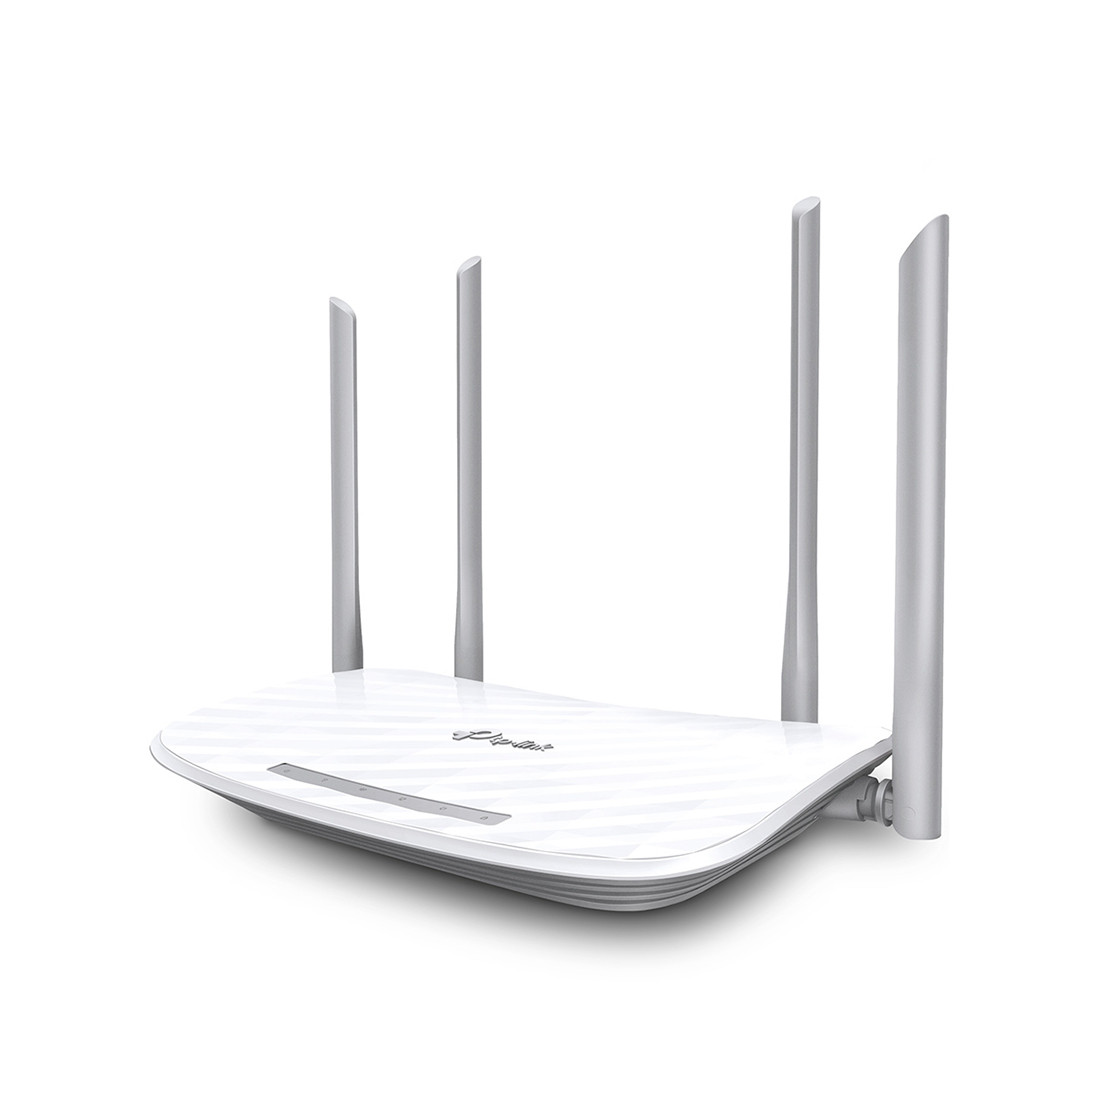 Маршрутизатор Wi-Fi AC1200 TP-Link Archer A5